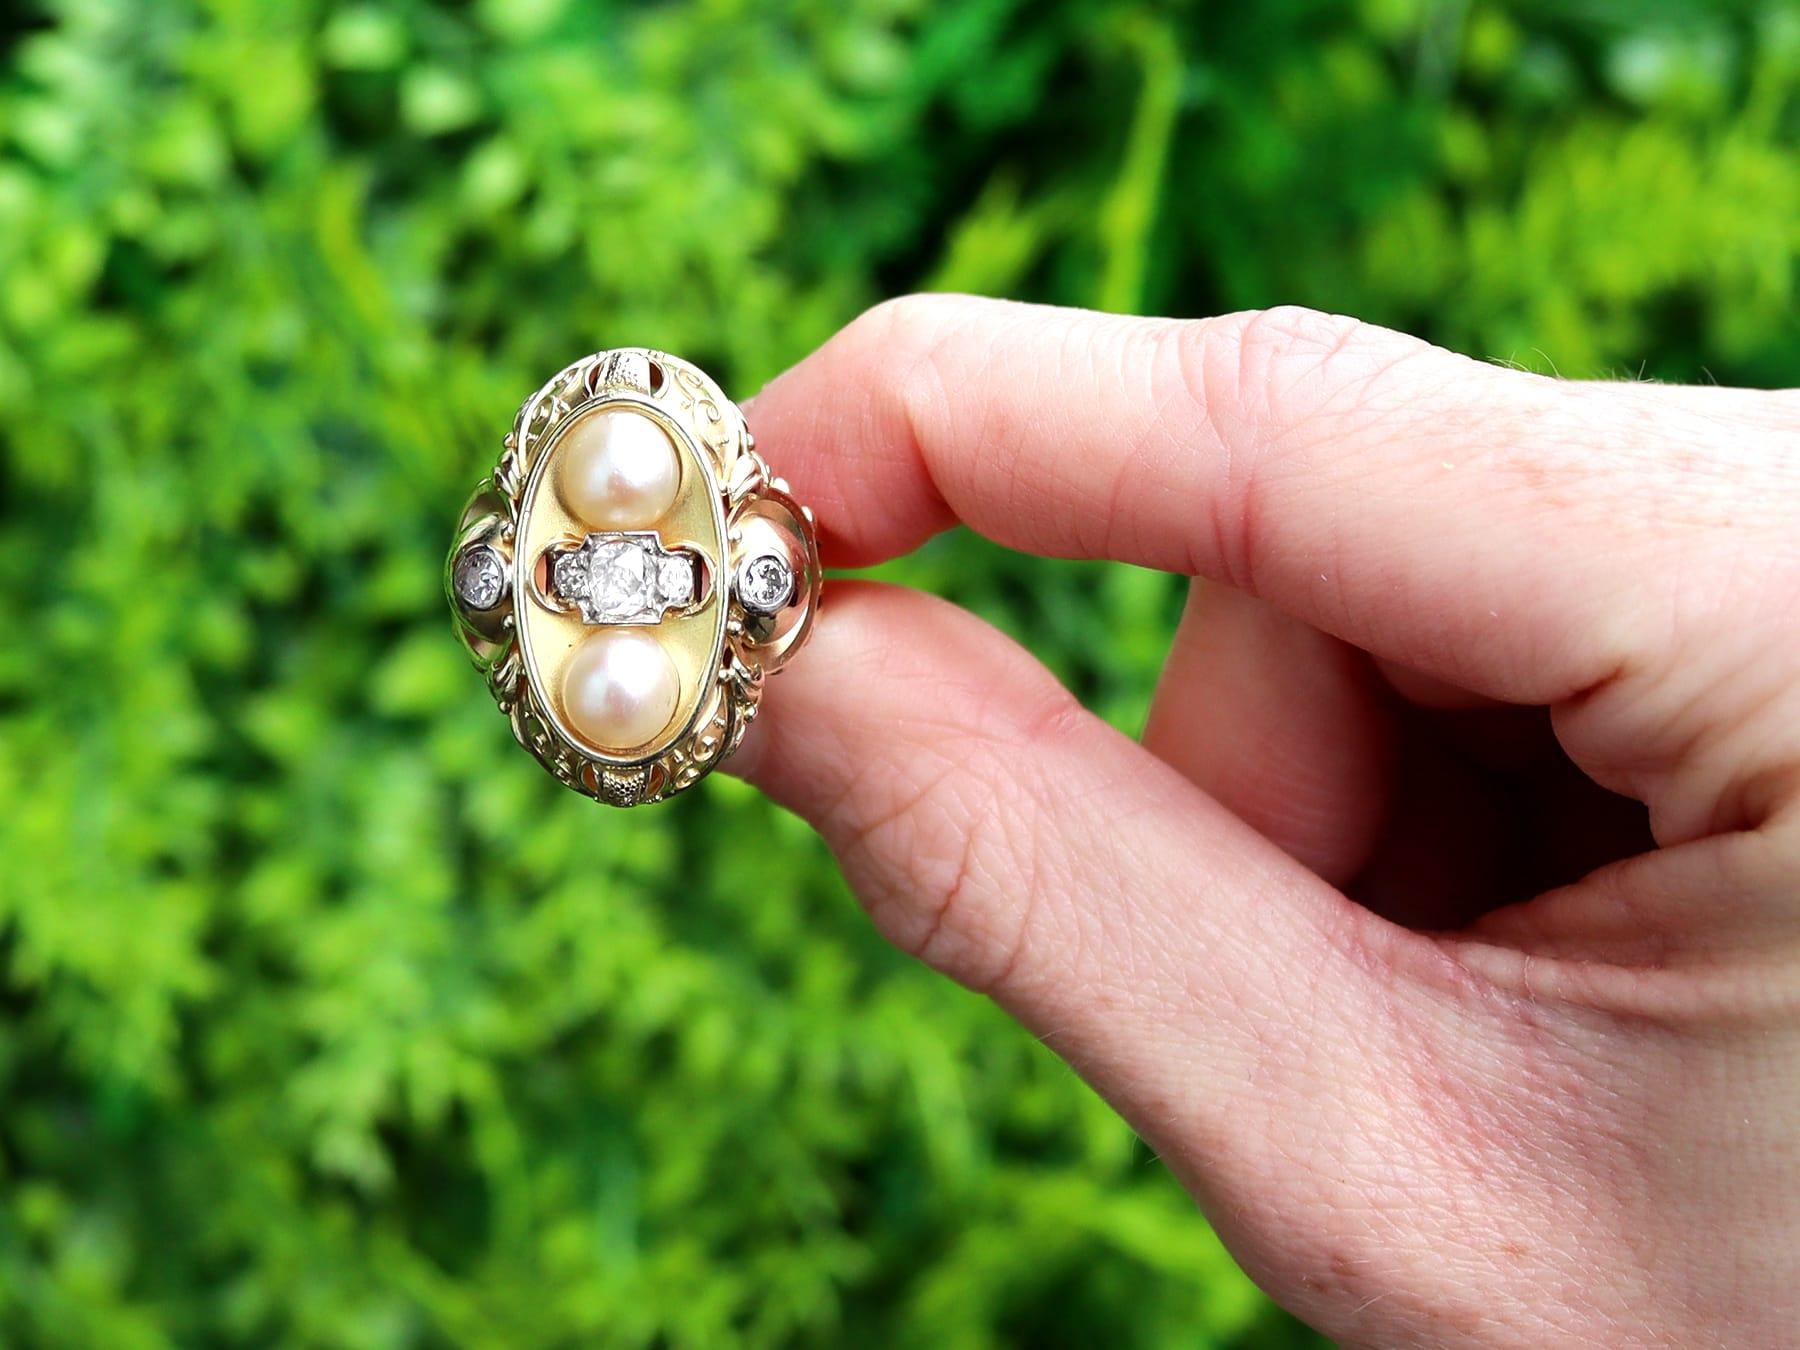 An impressive cultured pearl and 0.72 carat diamond, 14 karat yellow gold and 14 carat white gold dress ring; part of our diverse antique jewelry and estate jewelry collections.

This fine and impressive pearl and diamond ring has been crafted in